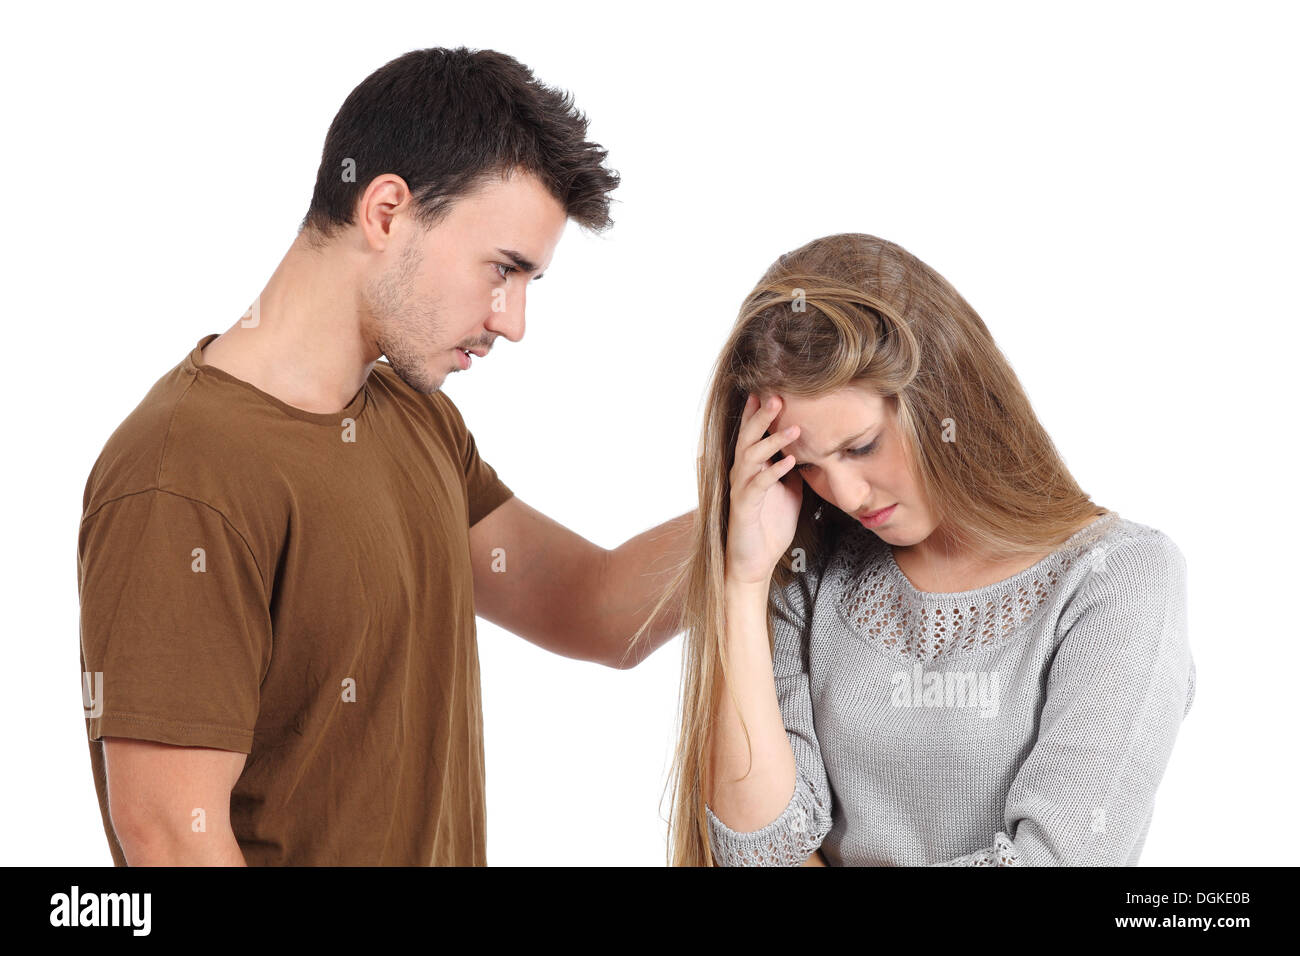 Man comforting to a woman isolated on a white background Stock Photo